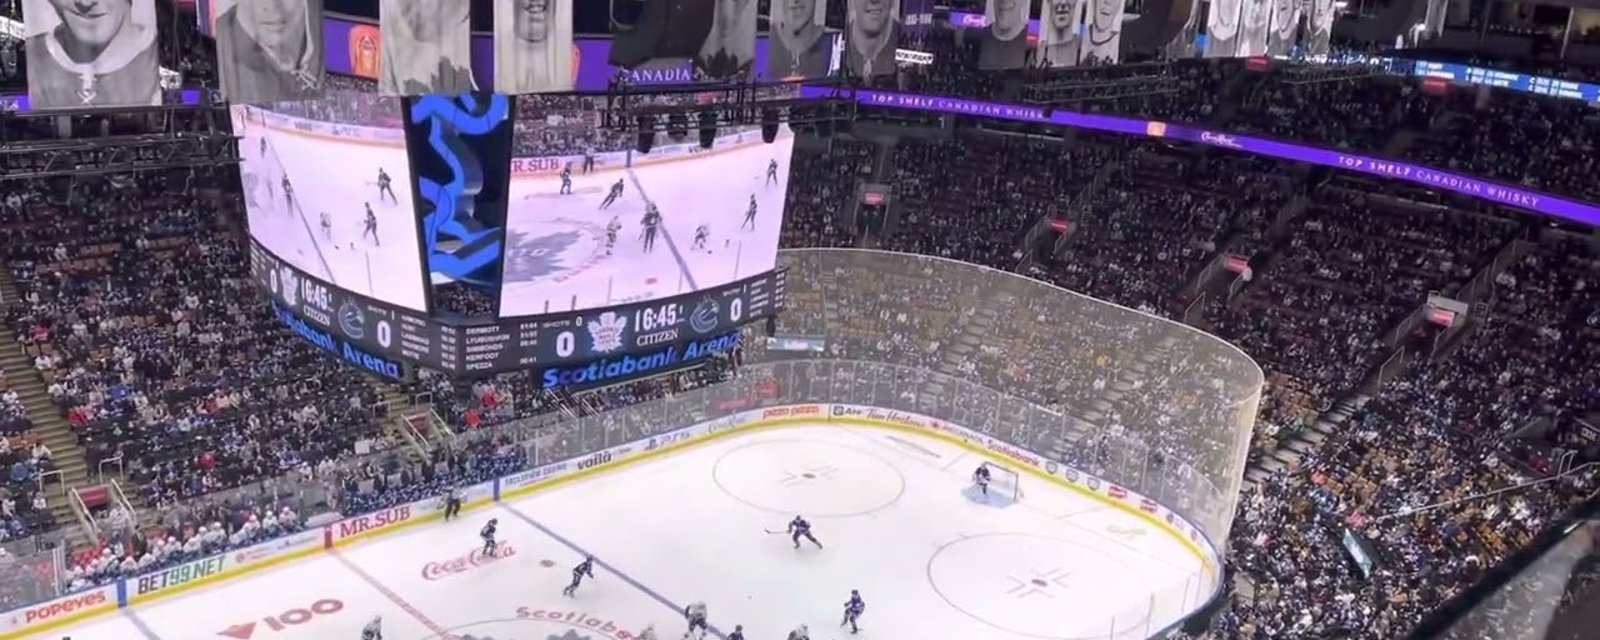 Shocking disparity in Maple Leafs ticket prices vs. other venues 